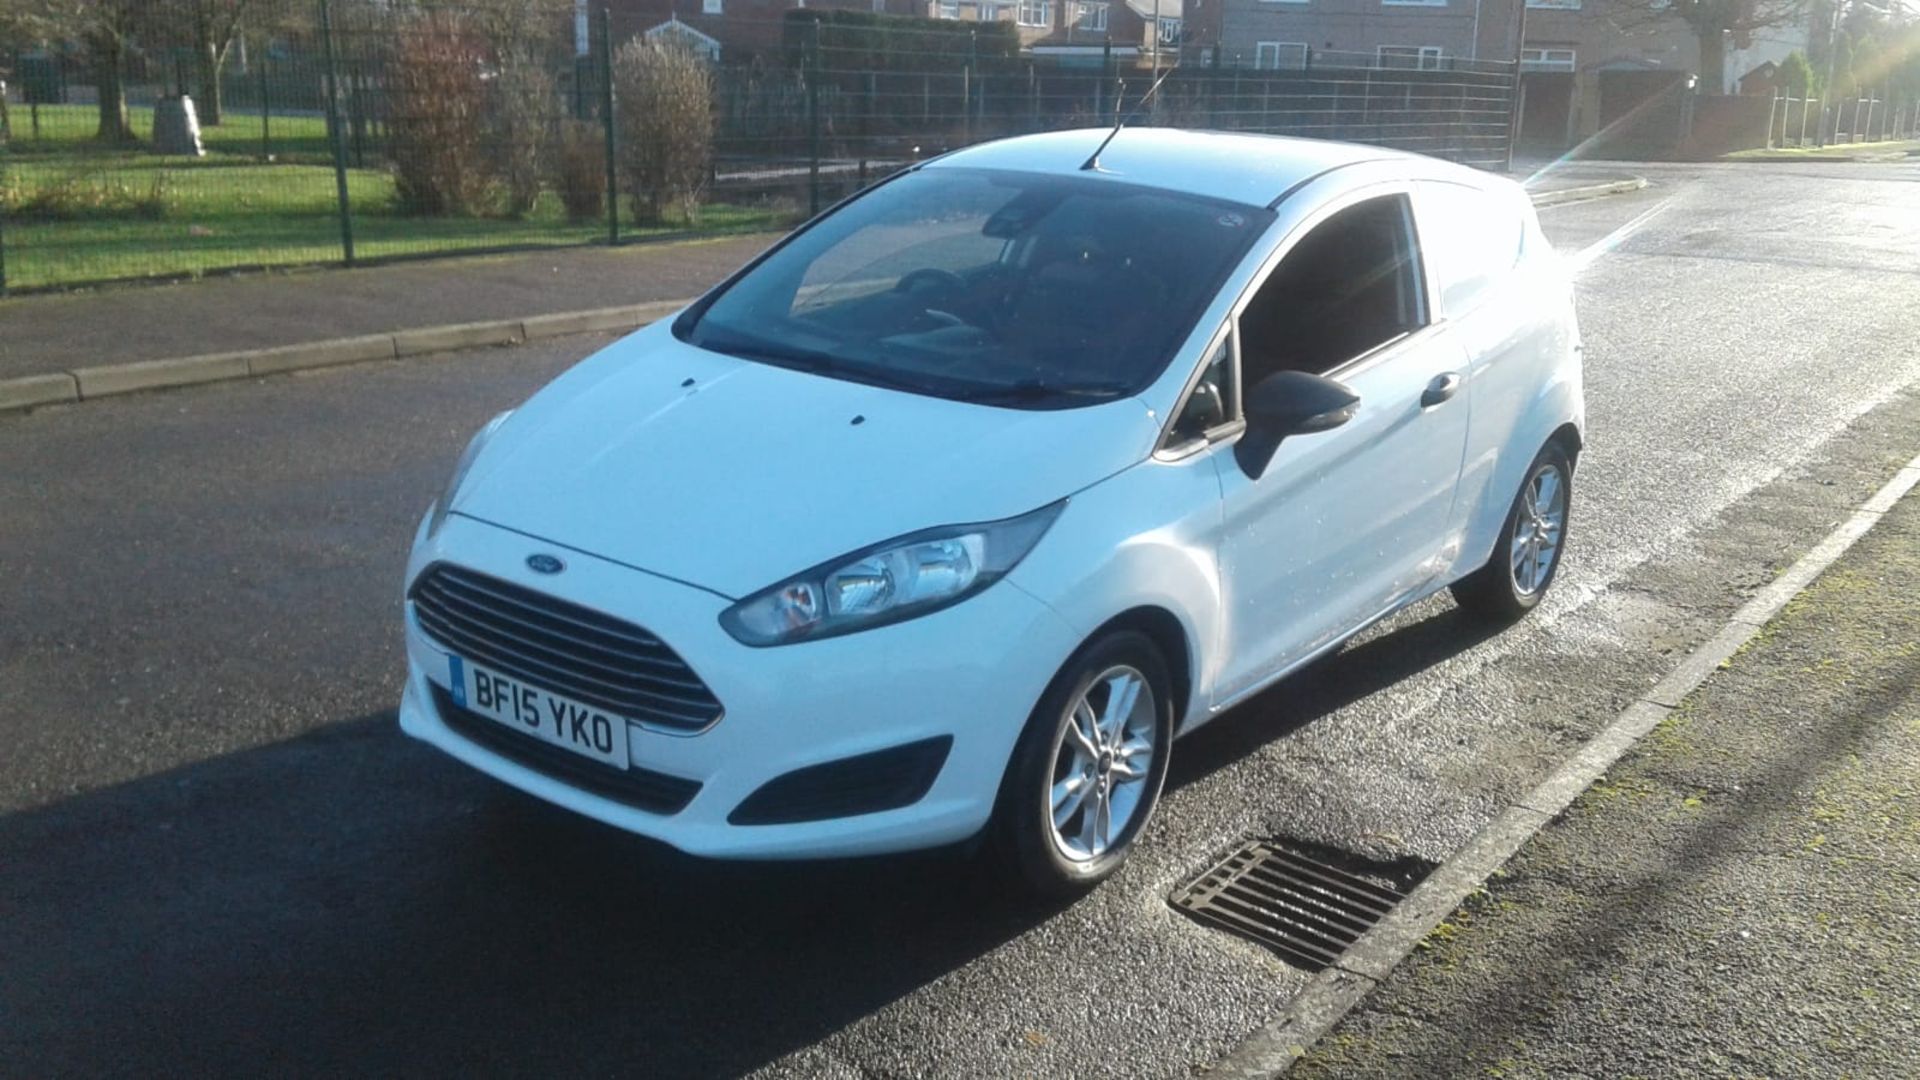 2015/15 REG FORD FIESTA ECONETIC TECH TDCI 1.6 CAR DERIVED VAN, SHOWING 0 FORMER KEEPERS *NO VAT* - Image 3 of 12